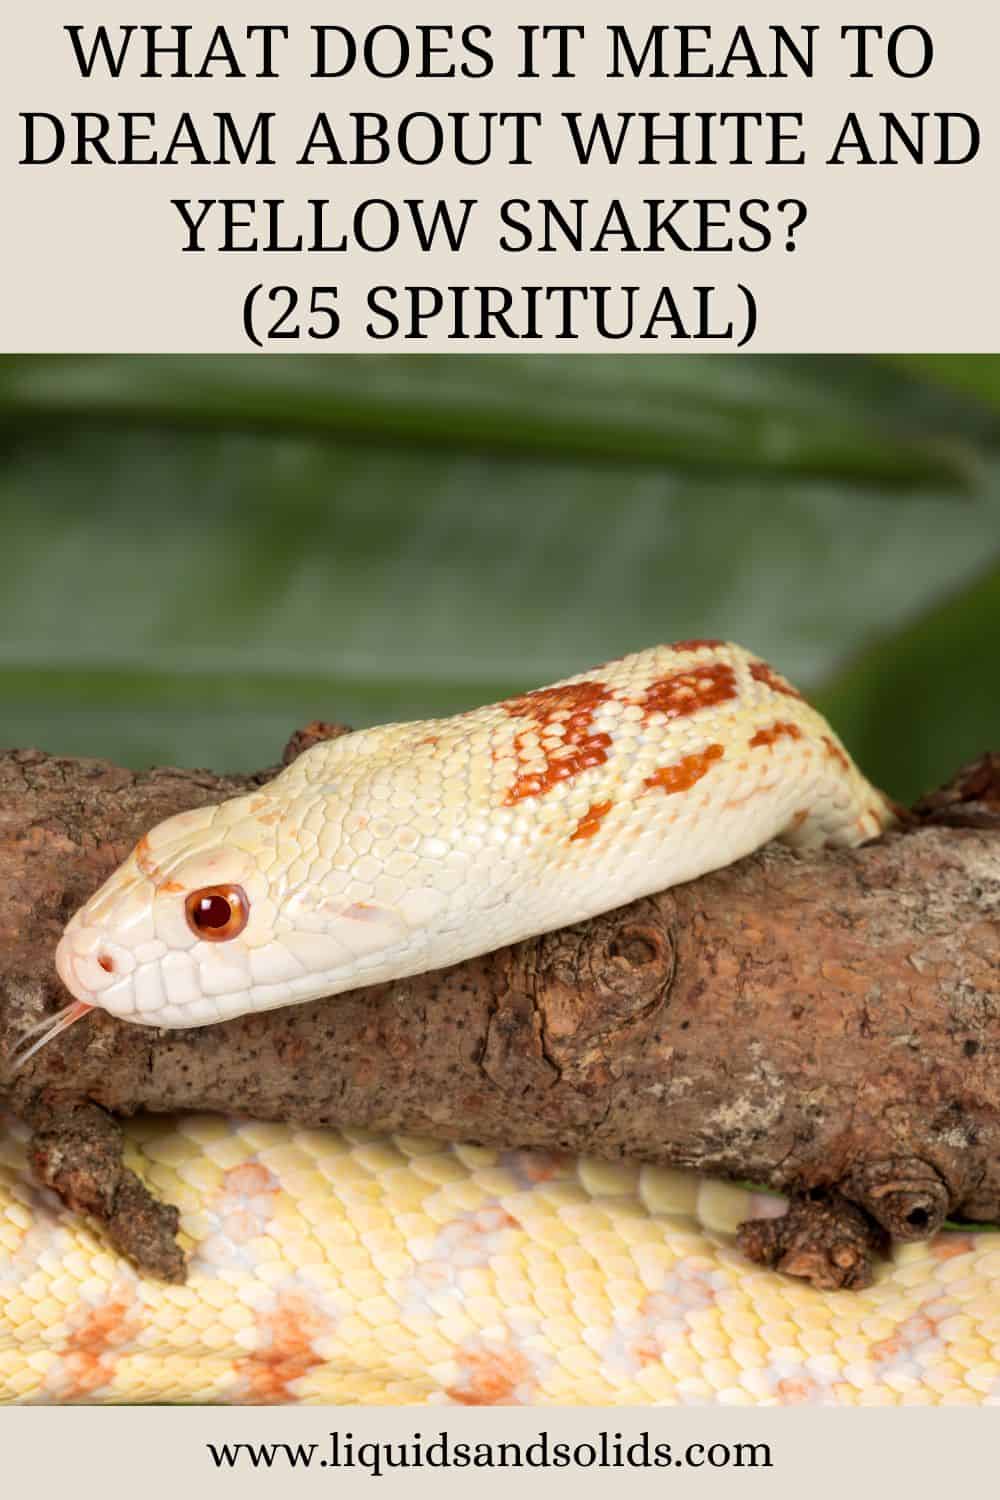 What Does It Mean To Dream About White and Yellow Snakes? (25 Spiritual)